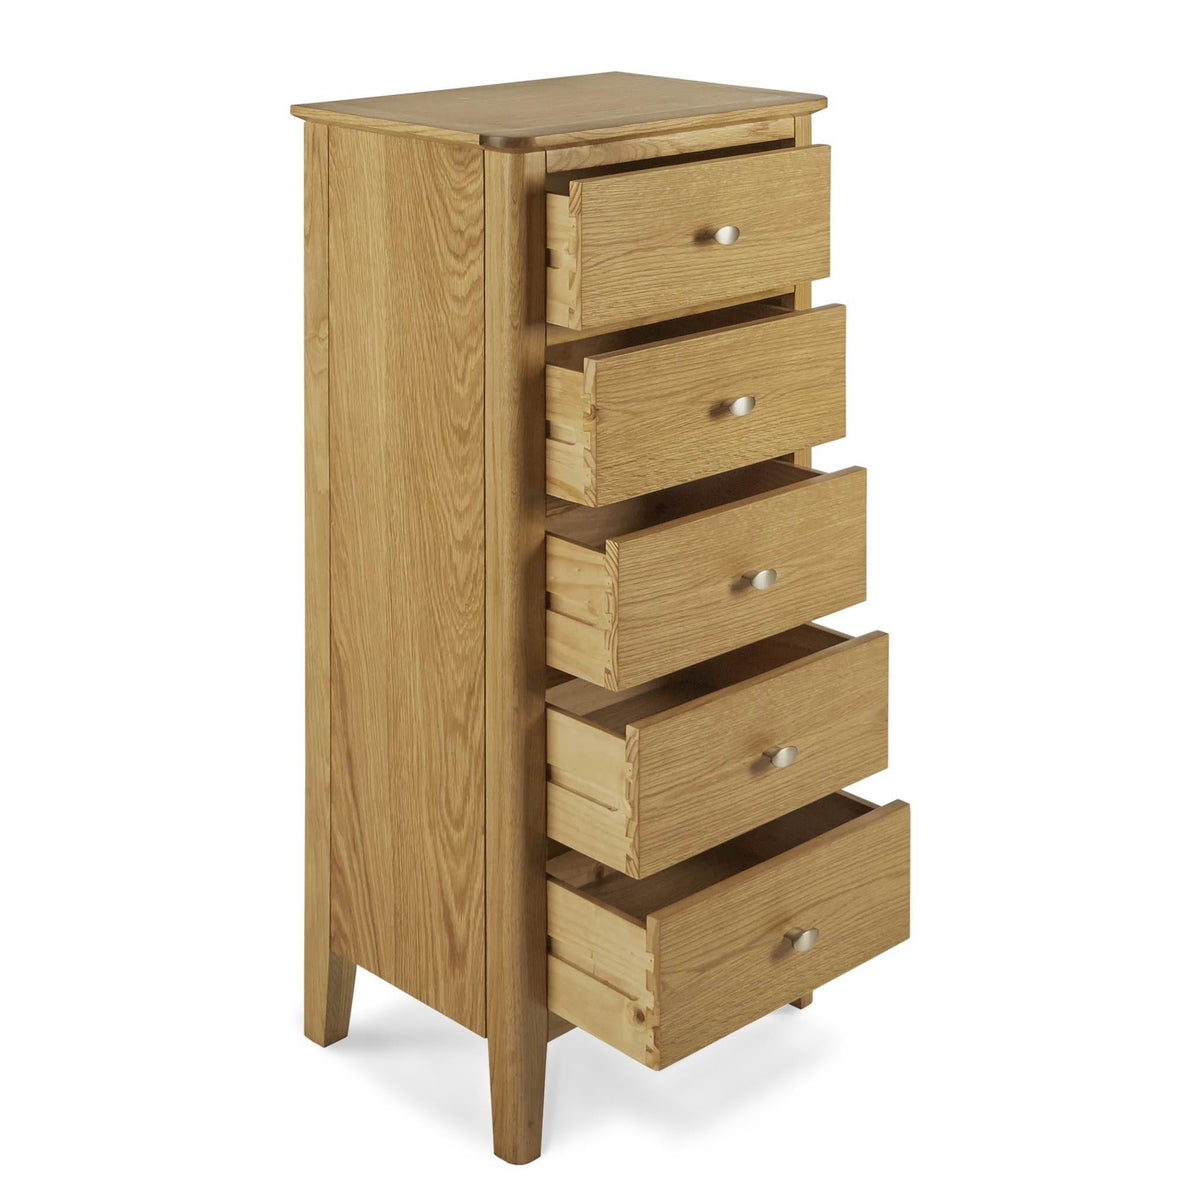 Alba Oak 5 Drawer Tallboy - Side view with drawers open